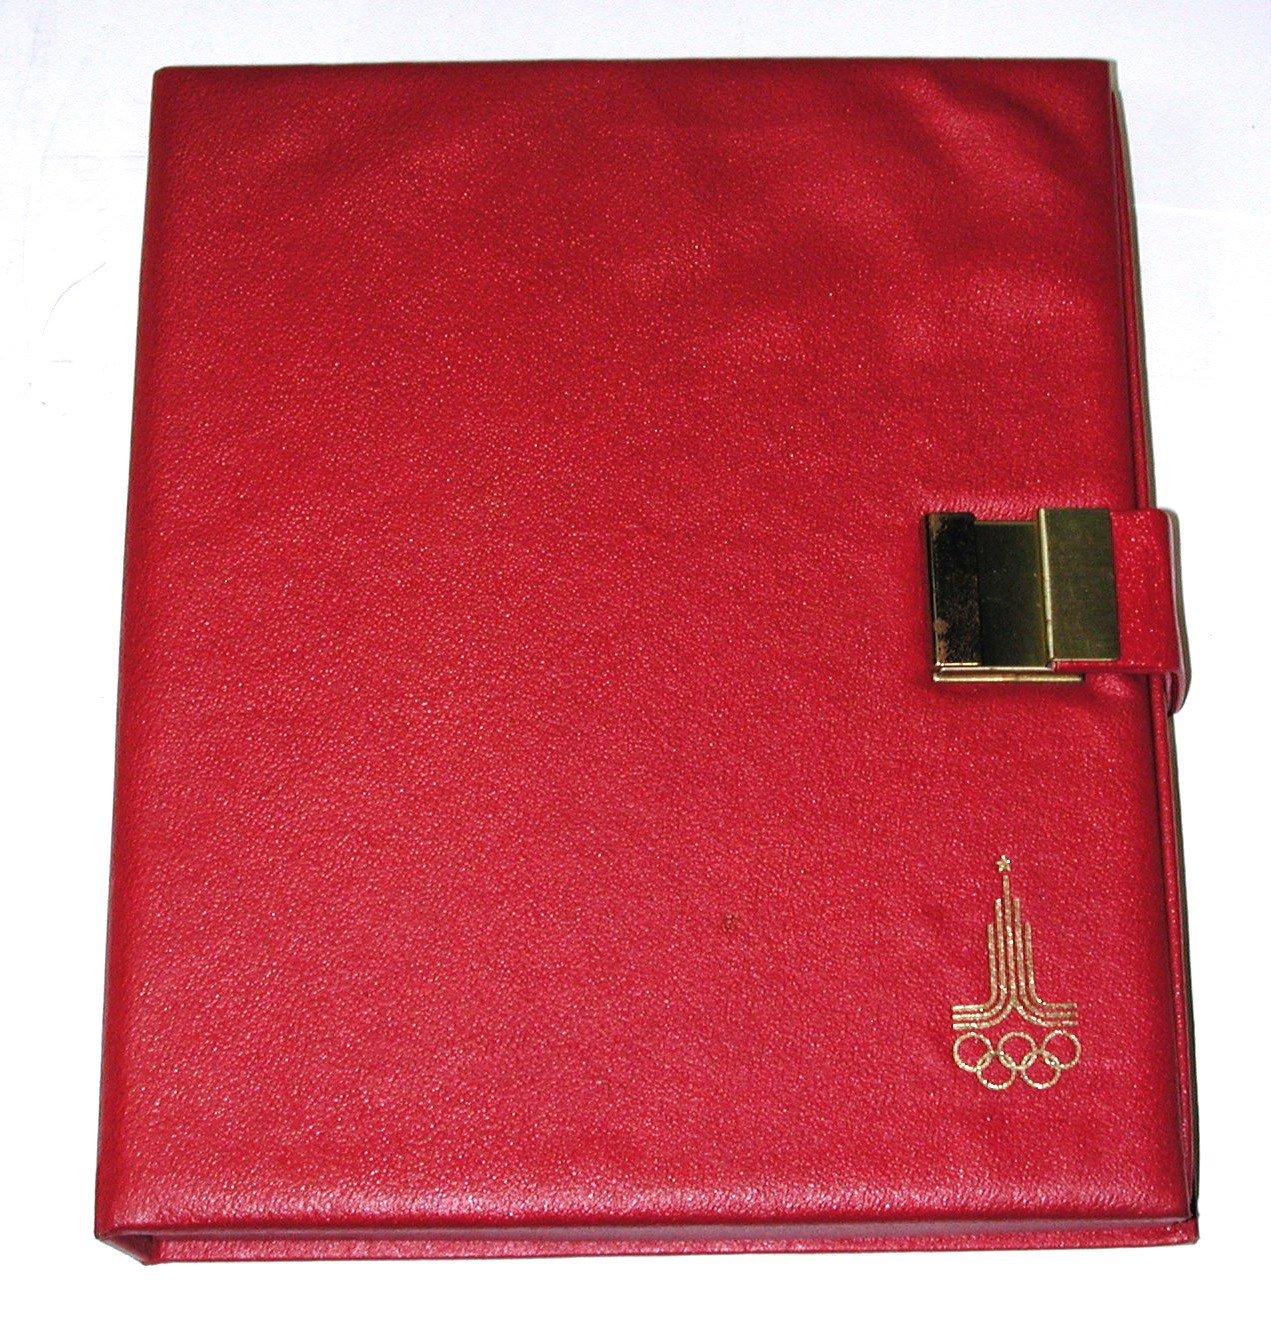 RUSSIA - MOSCOW 1980 SILVER OLYMPIC COIN COLLECTION